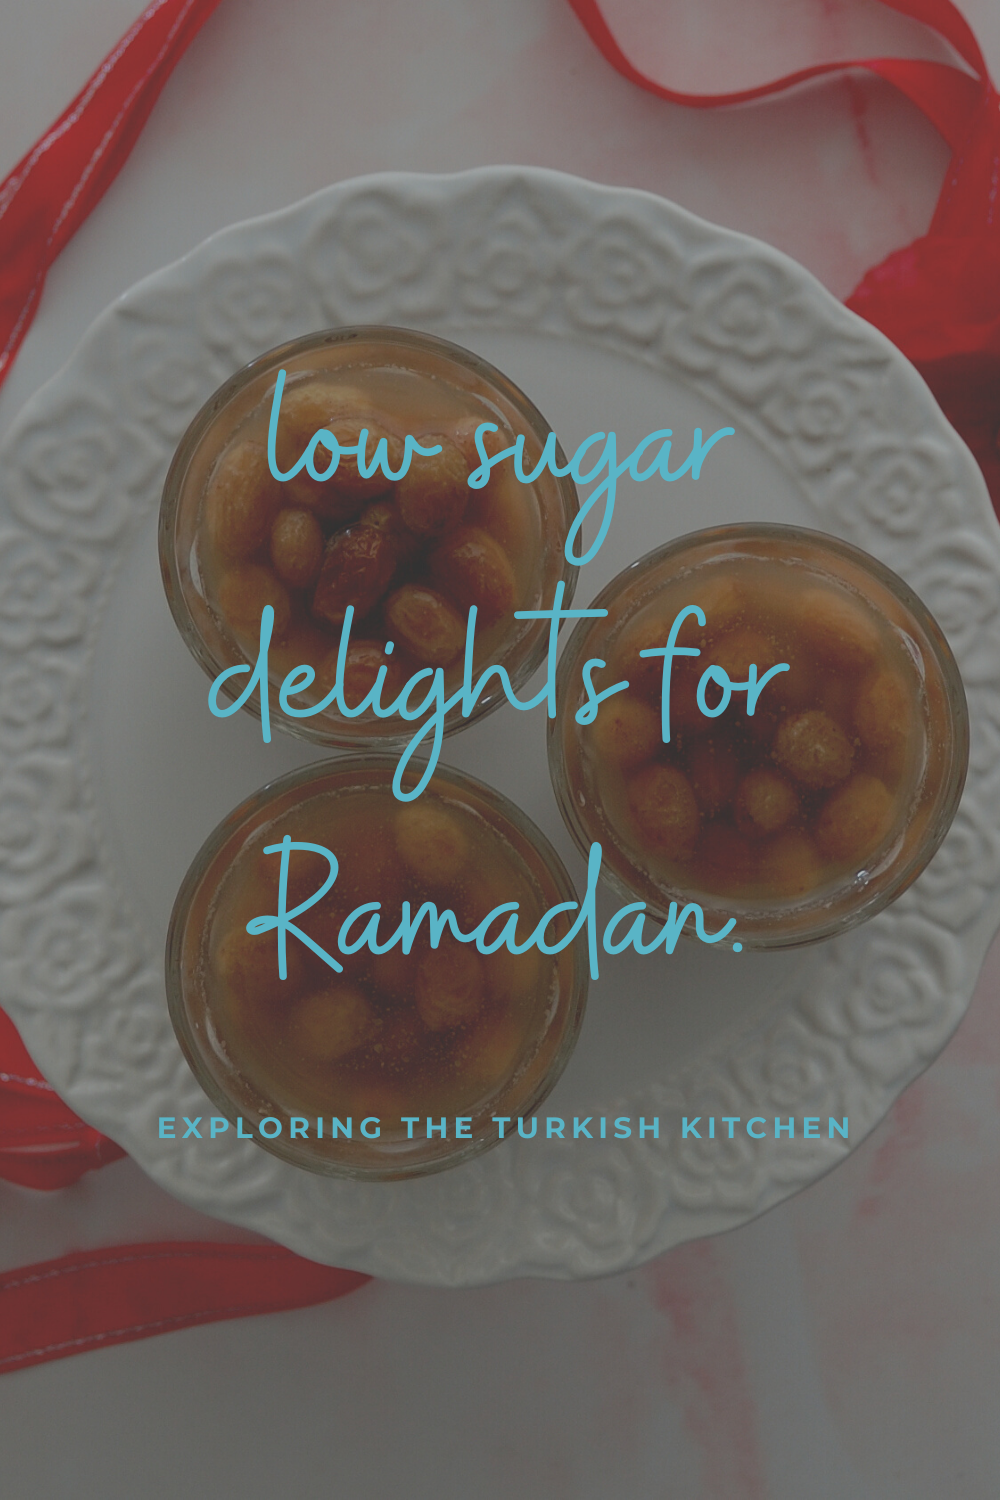 Pinable image for hoşaf recipe. Shows three glasses of hosaf with old photo and trinkets. Text overlay reads: low sugar delights for Ramadan. by Exploring The Turkish Kitchen